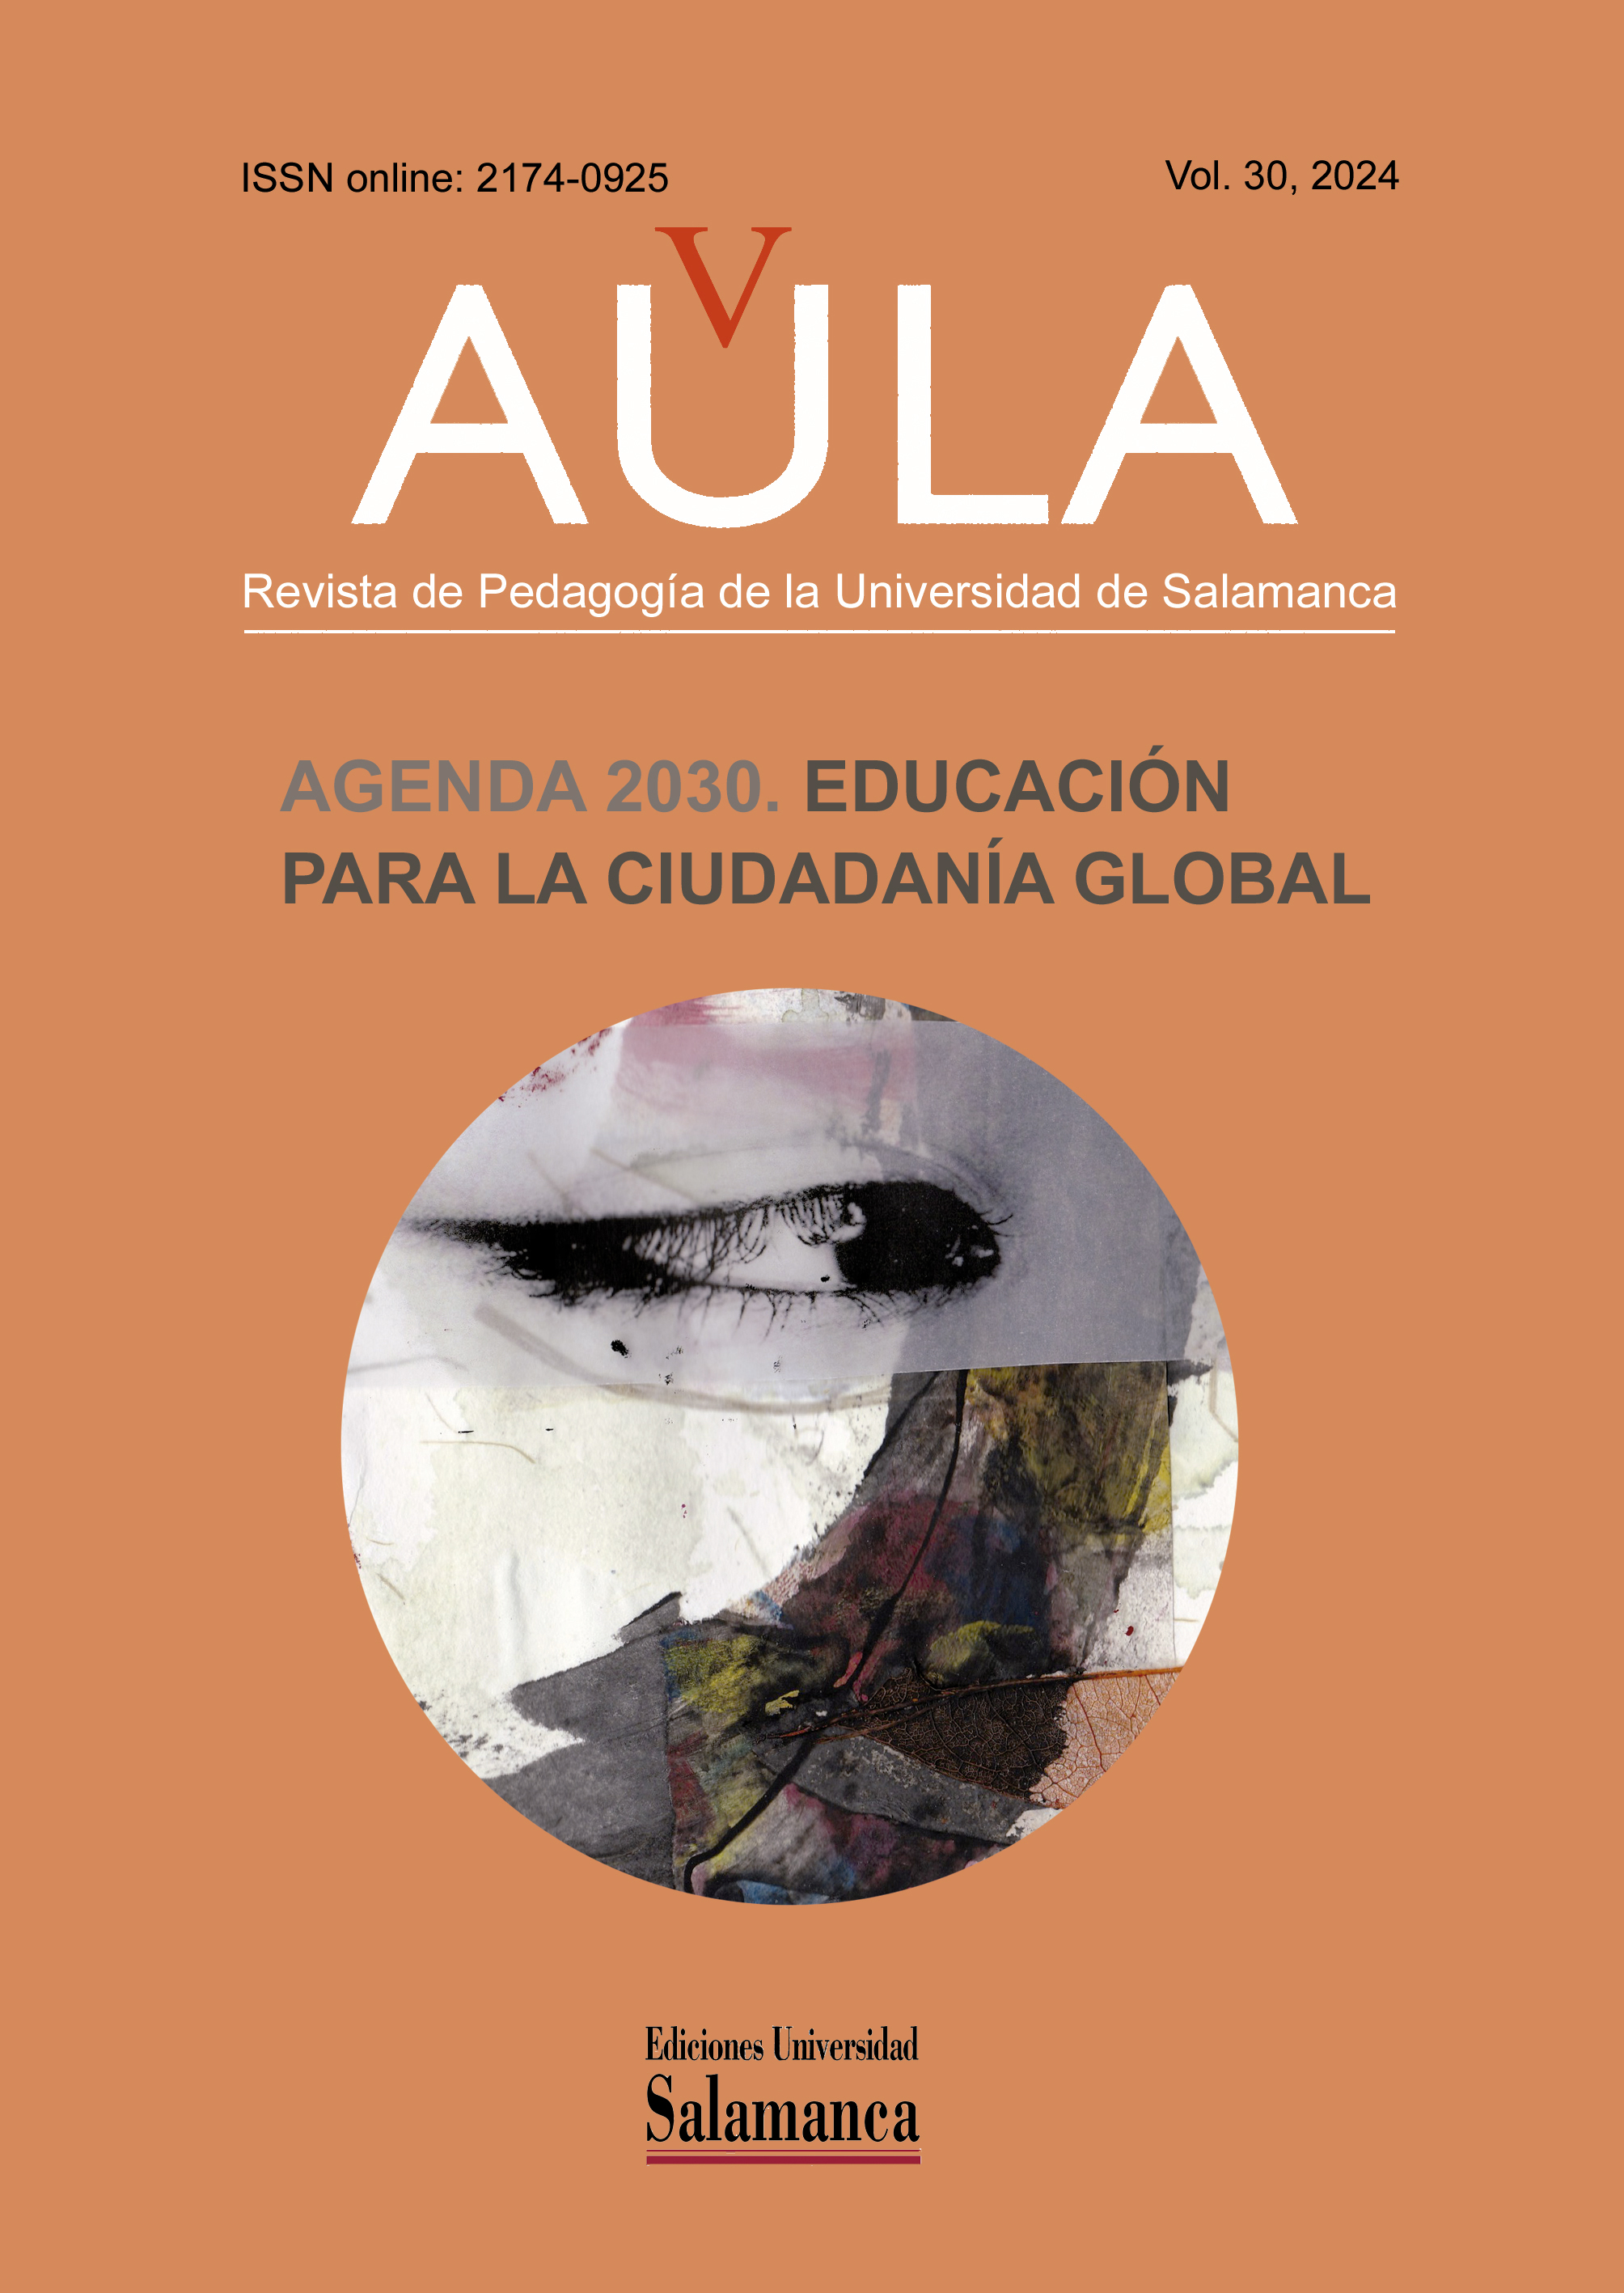                         View Vol. 30 (2024): Agenda 2030. Education for Global Citizenship
                    